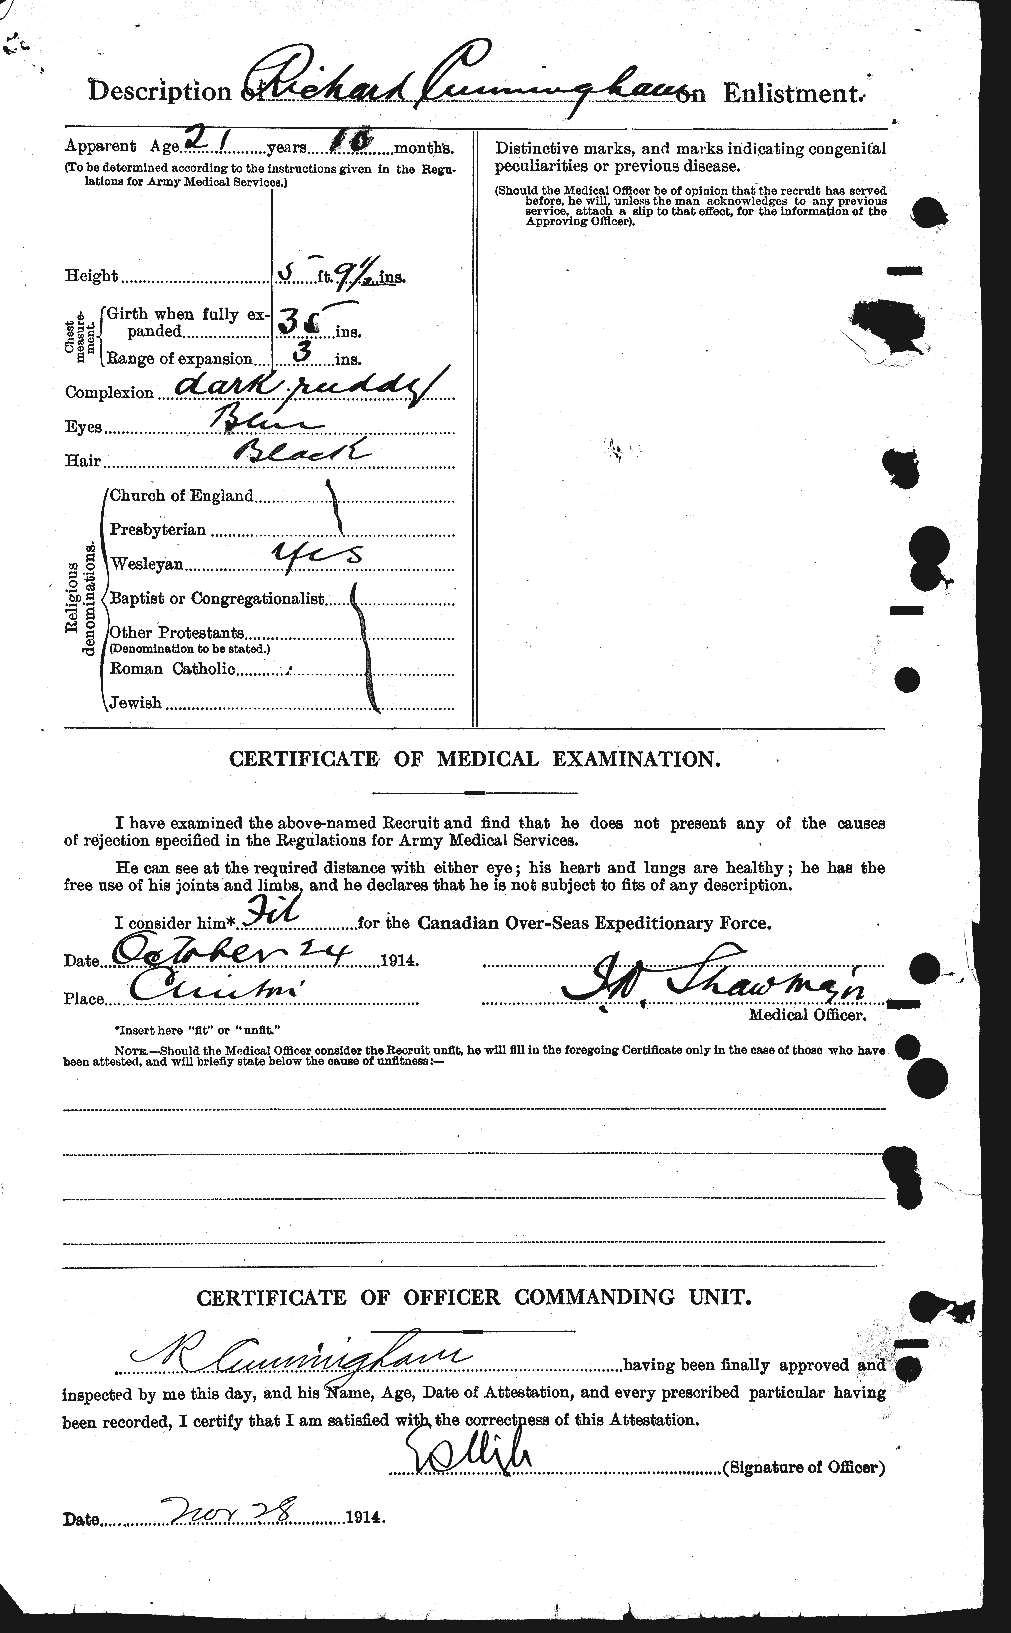 Personnel Records of the First World War - CEF 074507b